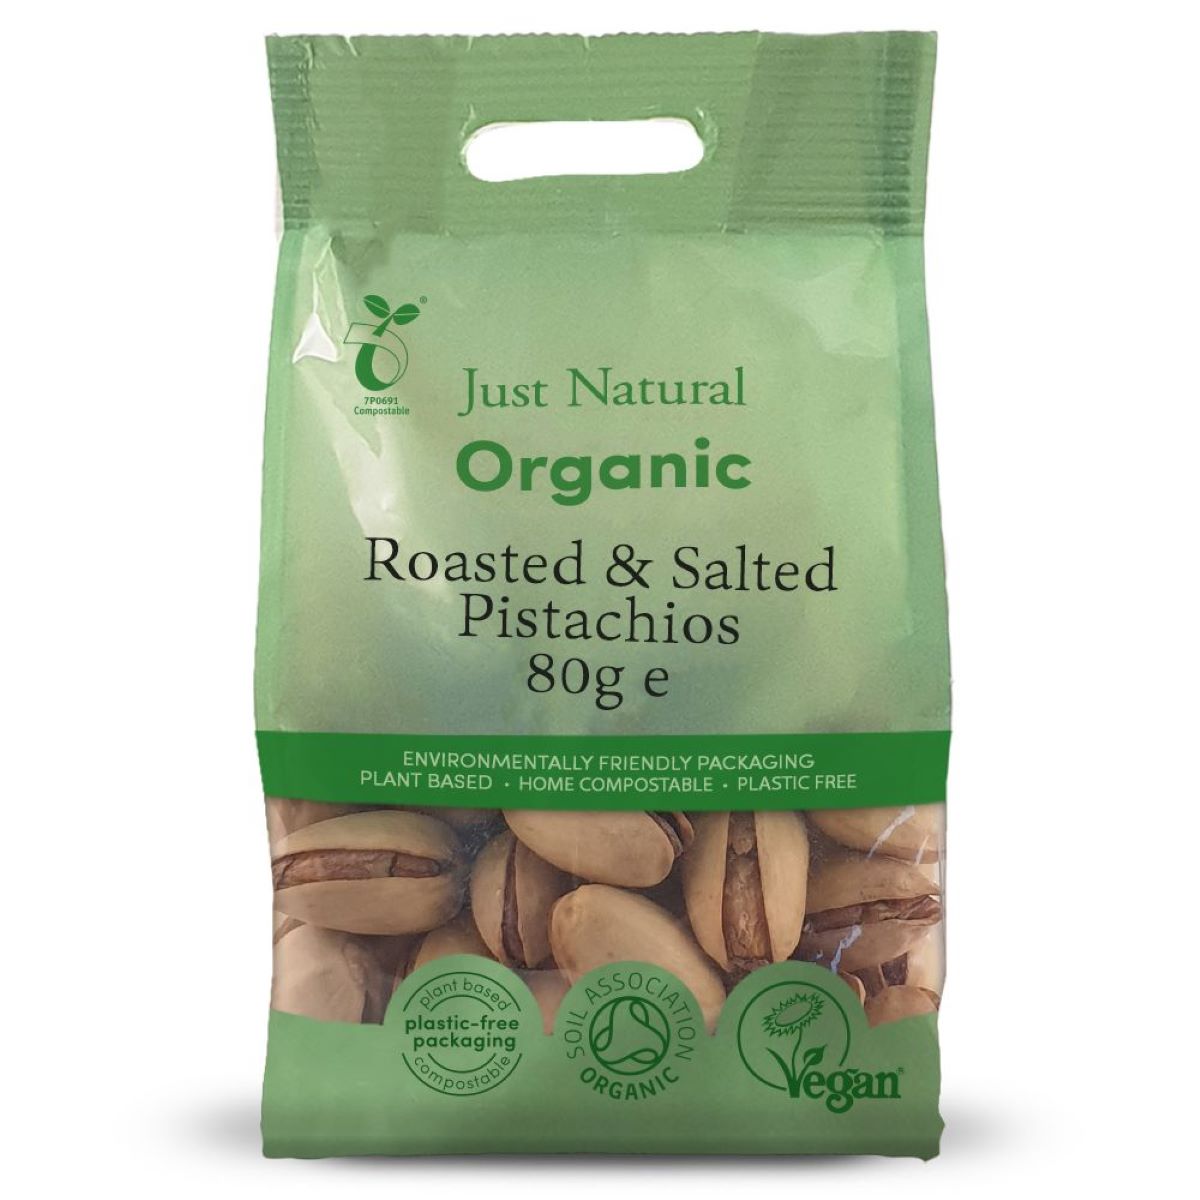 Just Natural Organic Roasted & Salted Pistachios 80g